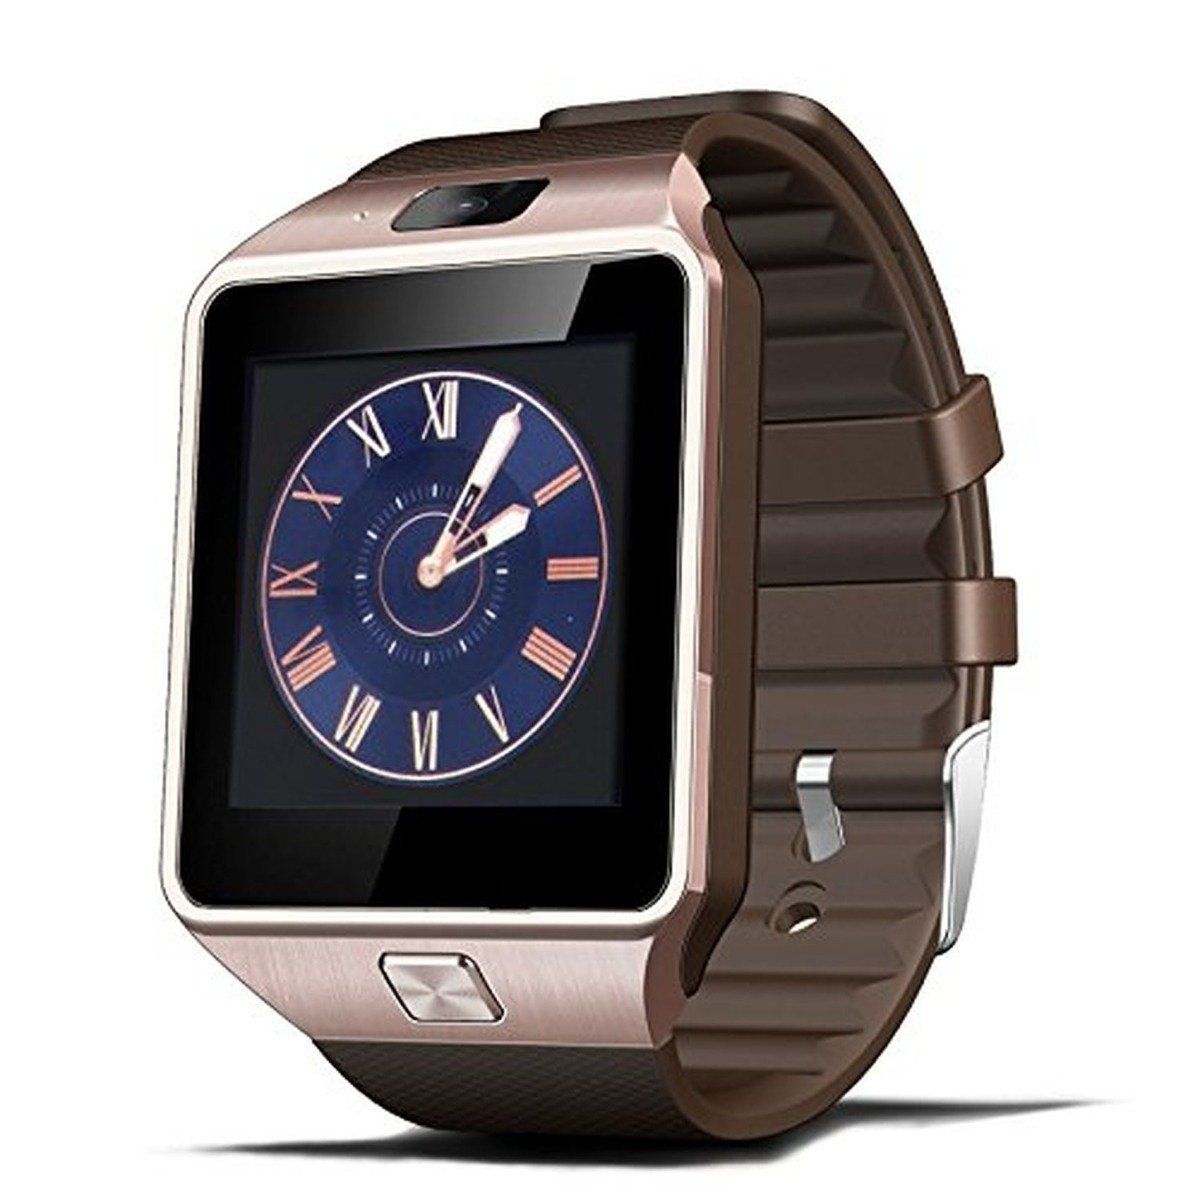 Bluetooth Smart Watch with Camera, Pedometer, Activity Monitor and iPhone/Android Phone Sync / Gold